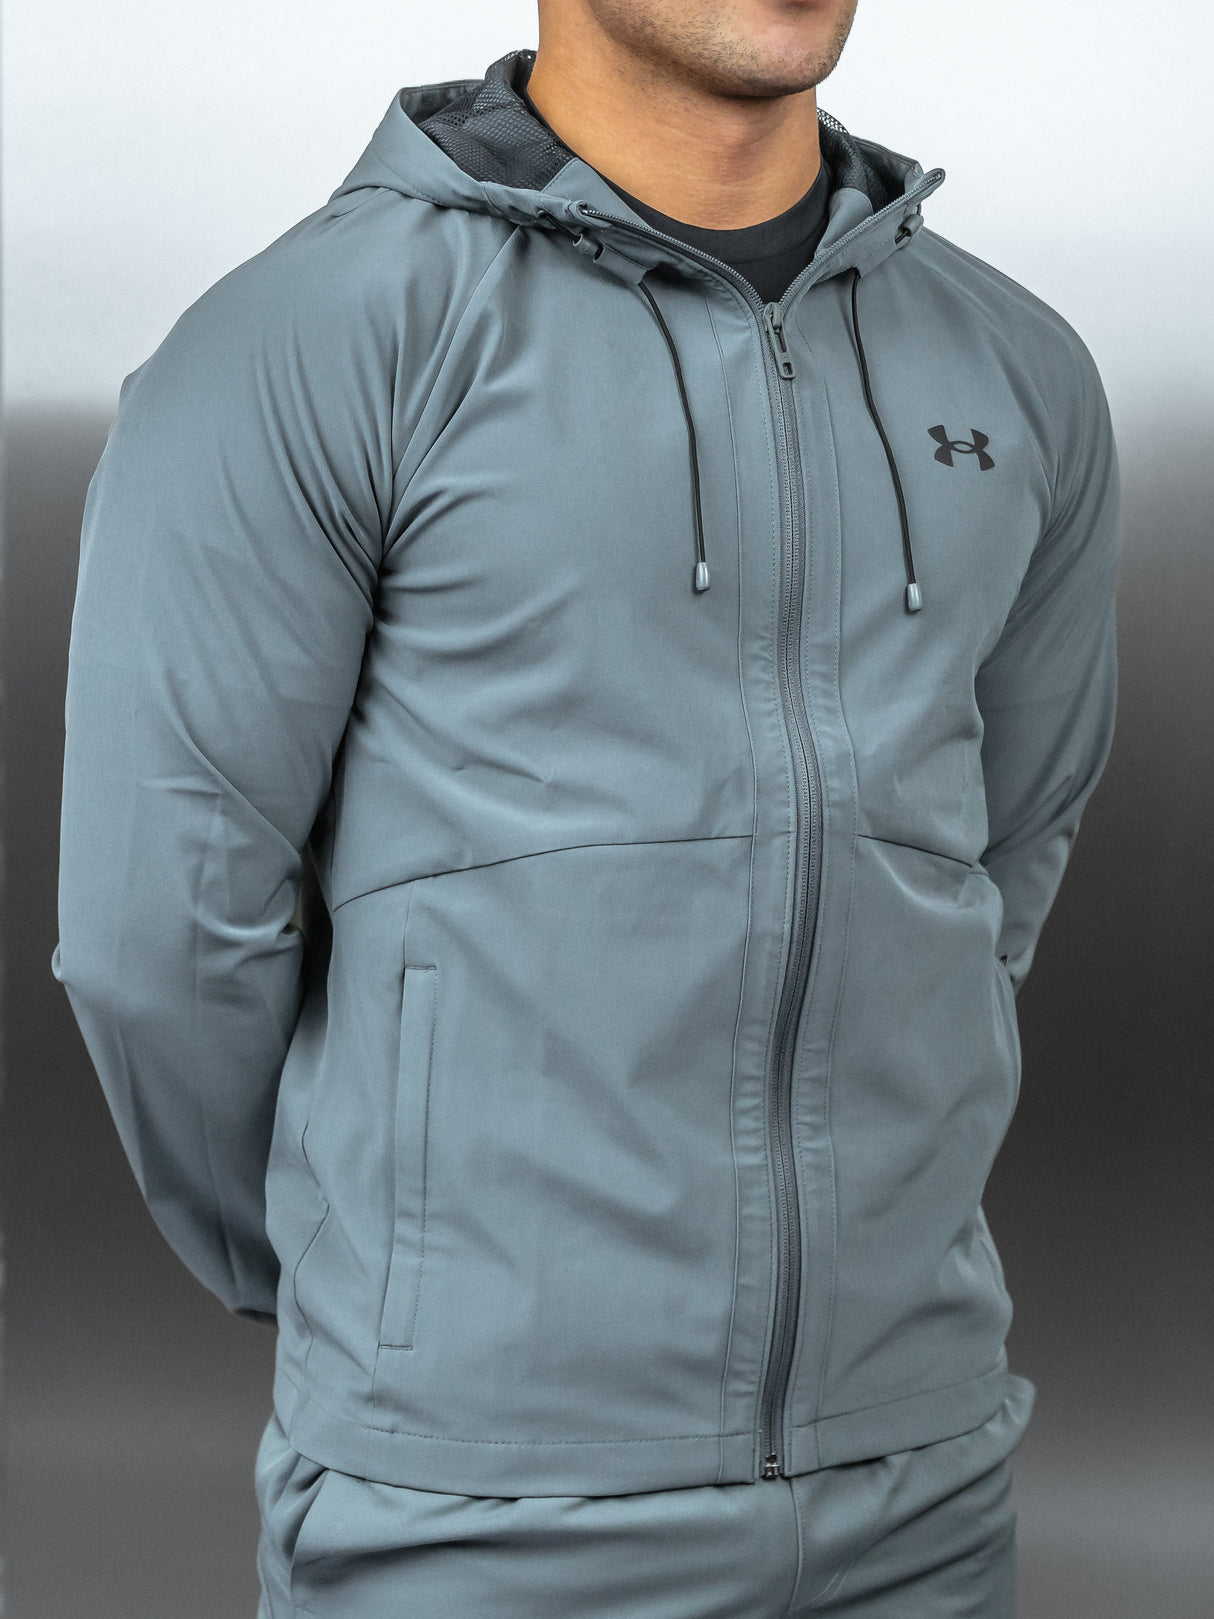 Under Armour - Stretch Woven Jacket - Grey